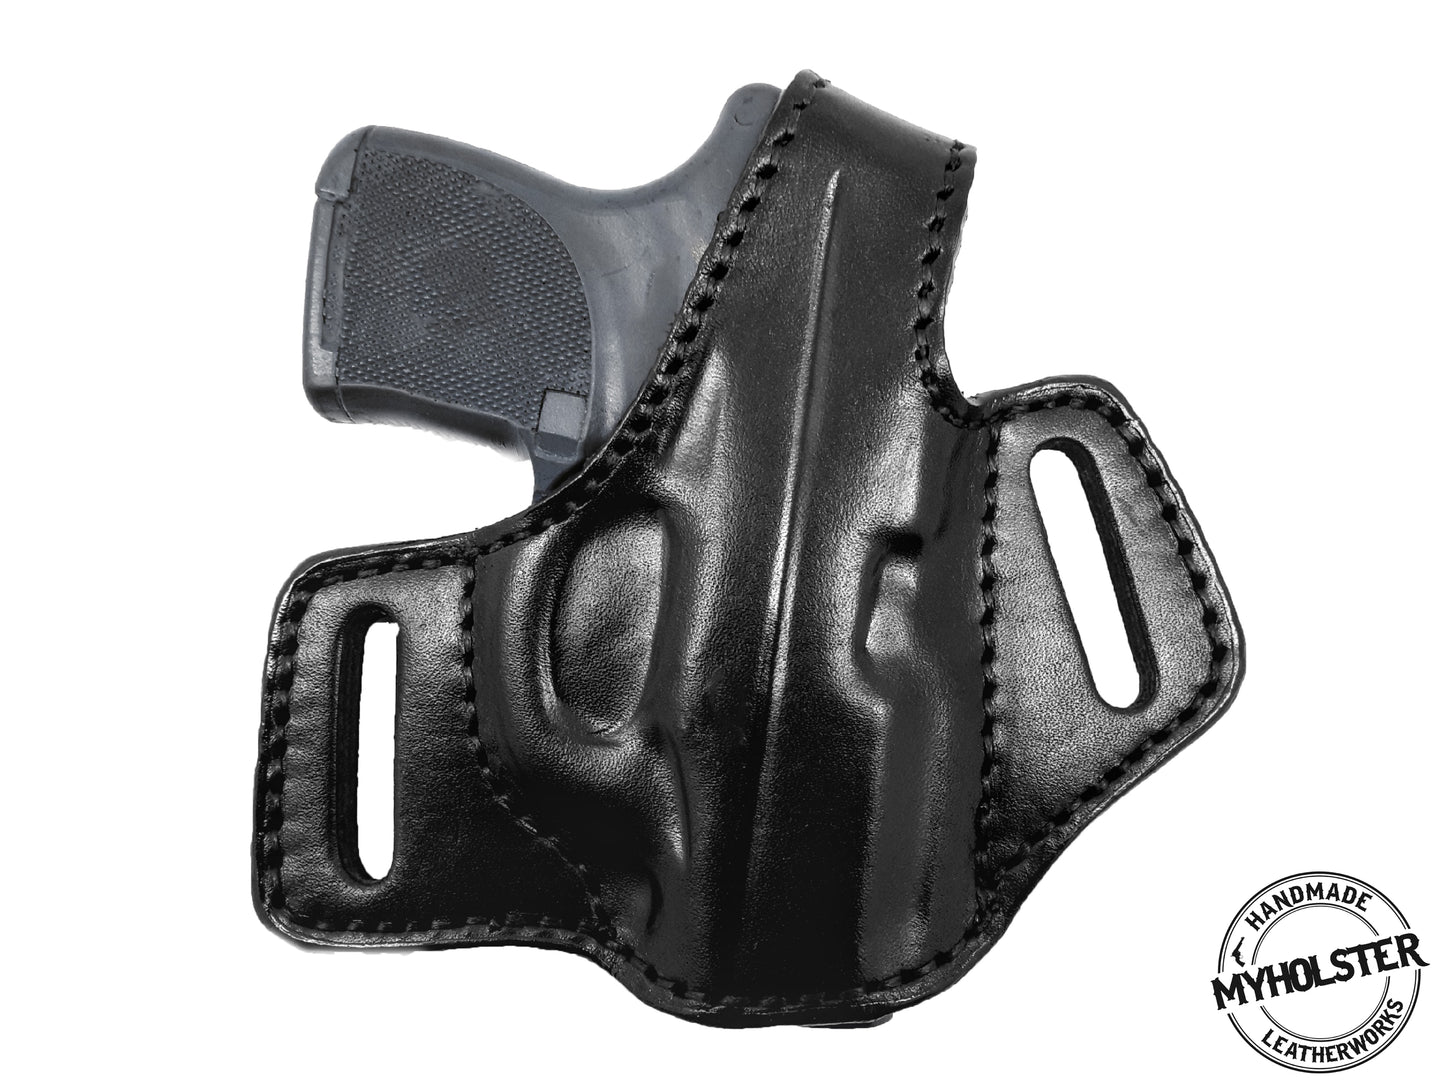 Kel-Tec P-3AT OWB Thumb Break Compact Style Right Hand Leather Holster